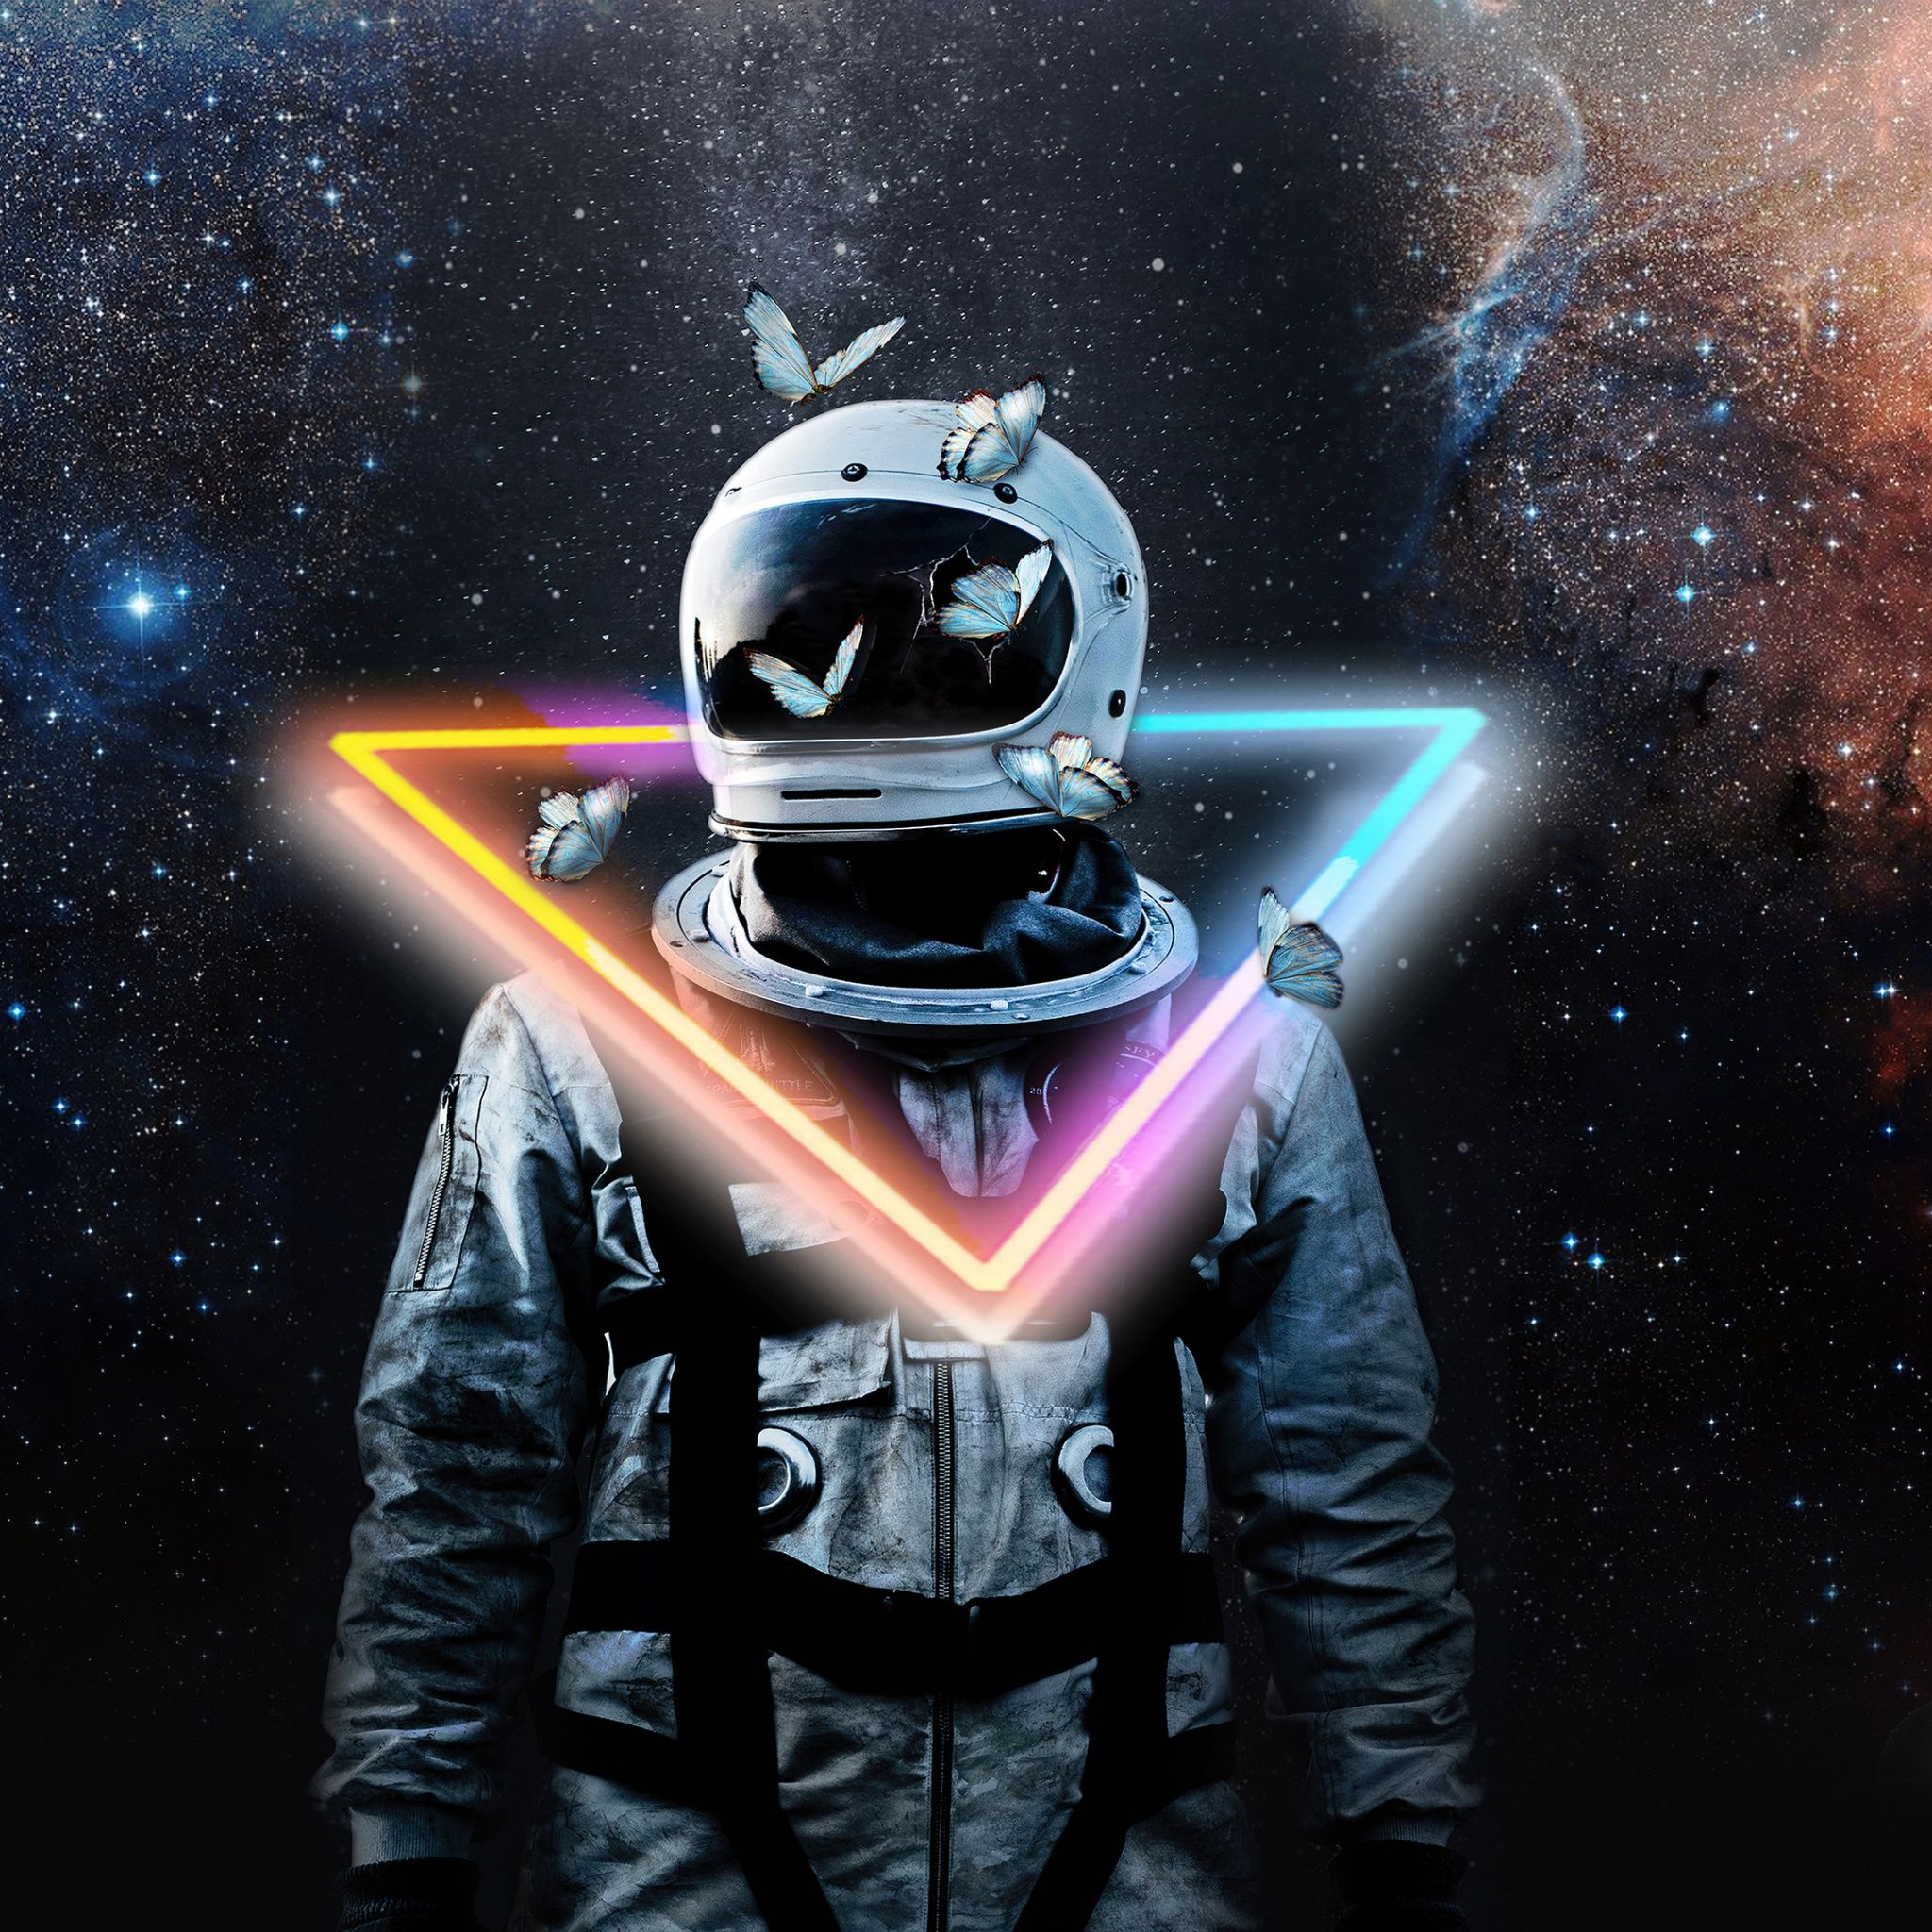 A man in an astronaut suit with neon lights - Astronaut